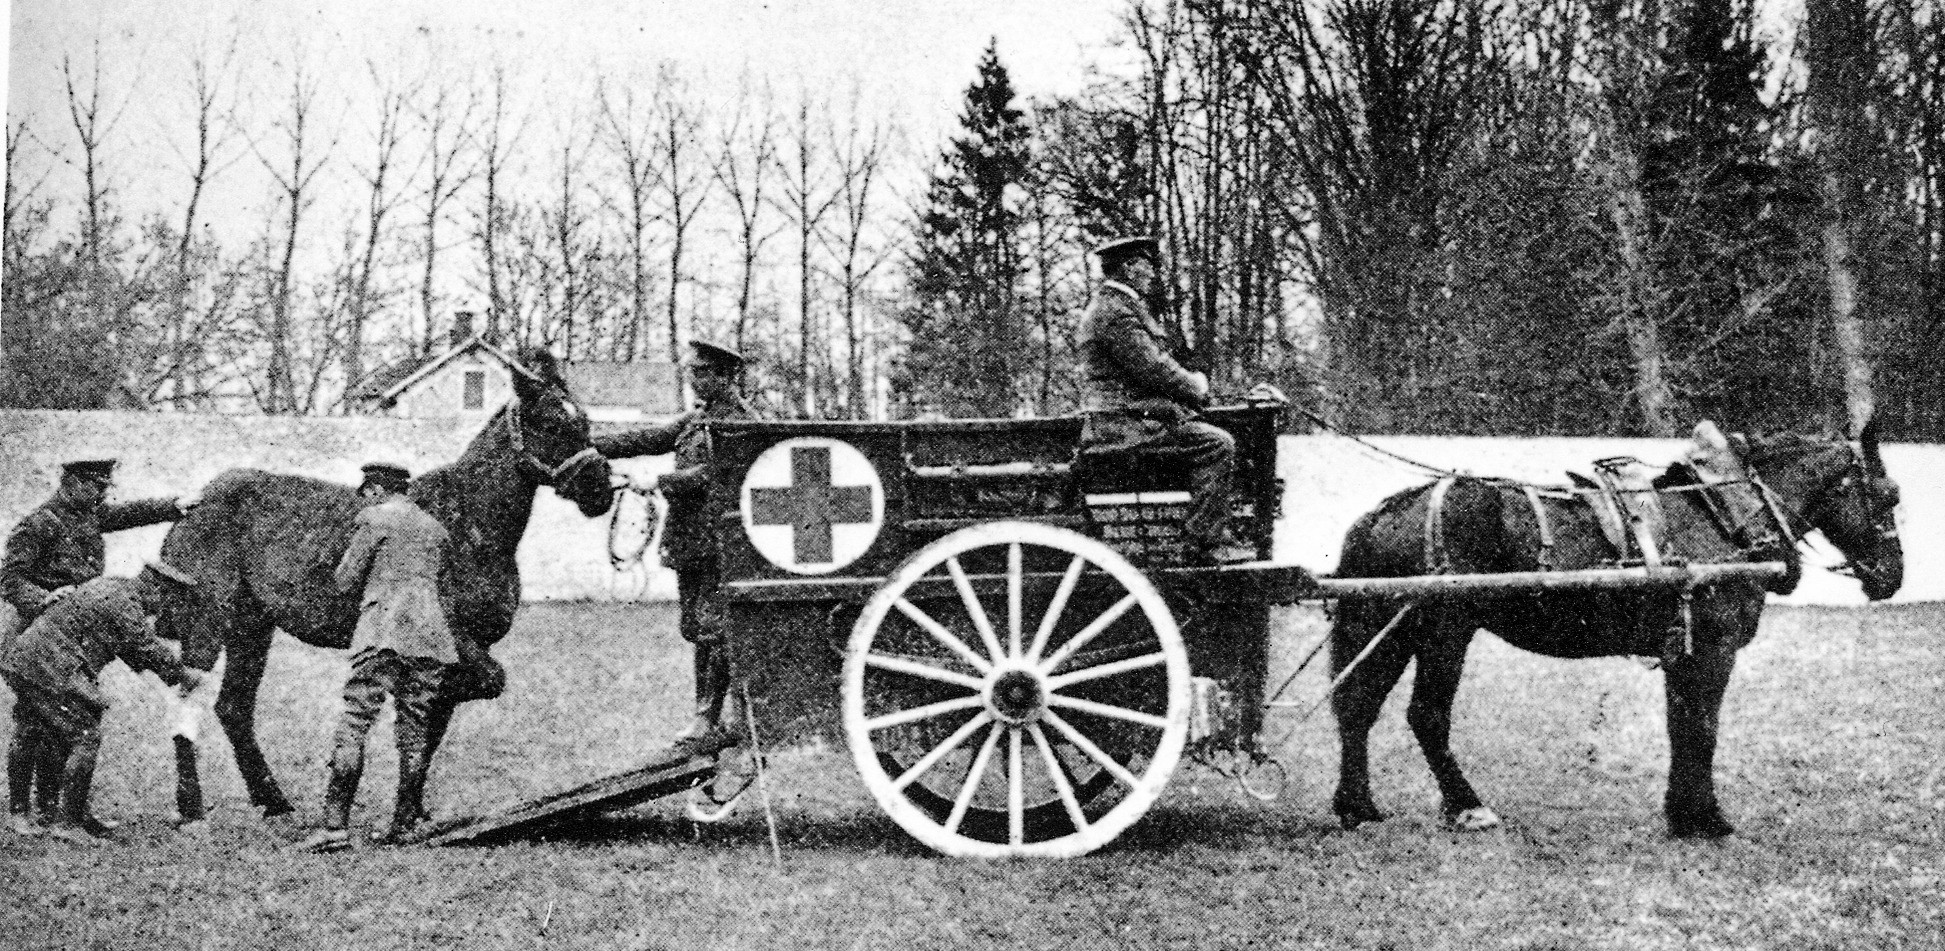 Blue Cross workers lead an injured horse towards a Blue Cross horse ambulance, which is driven by another horse, in France during the First World War